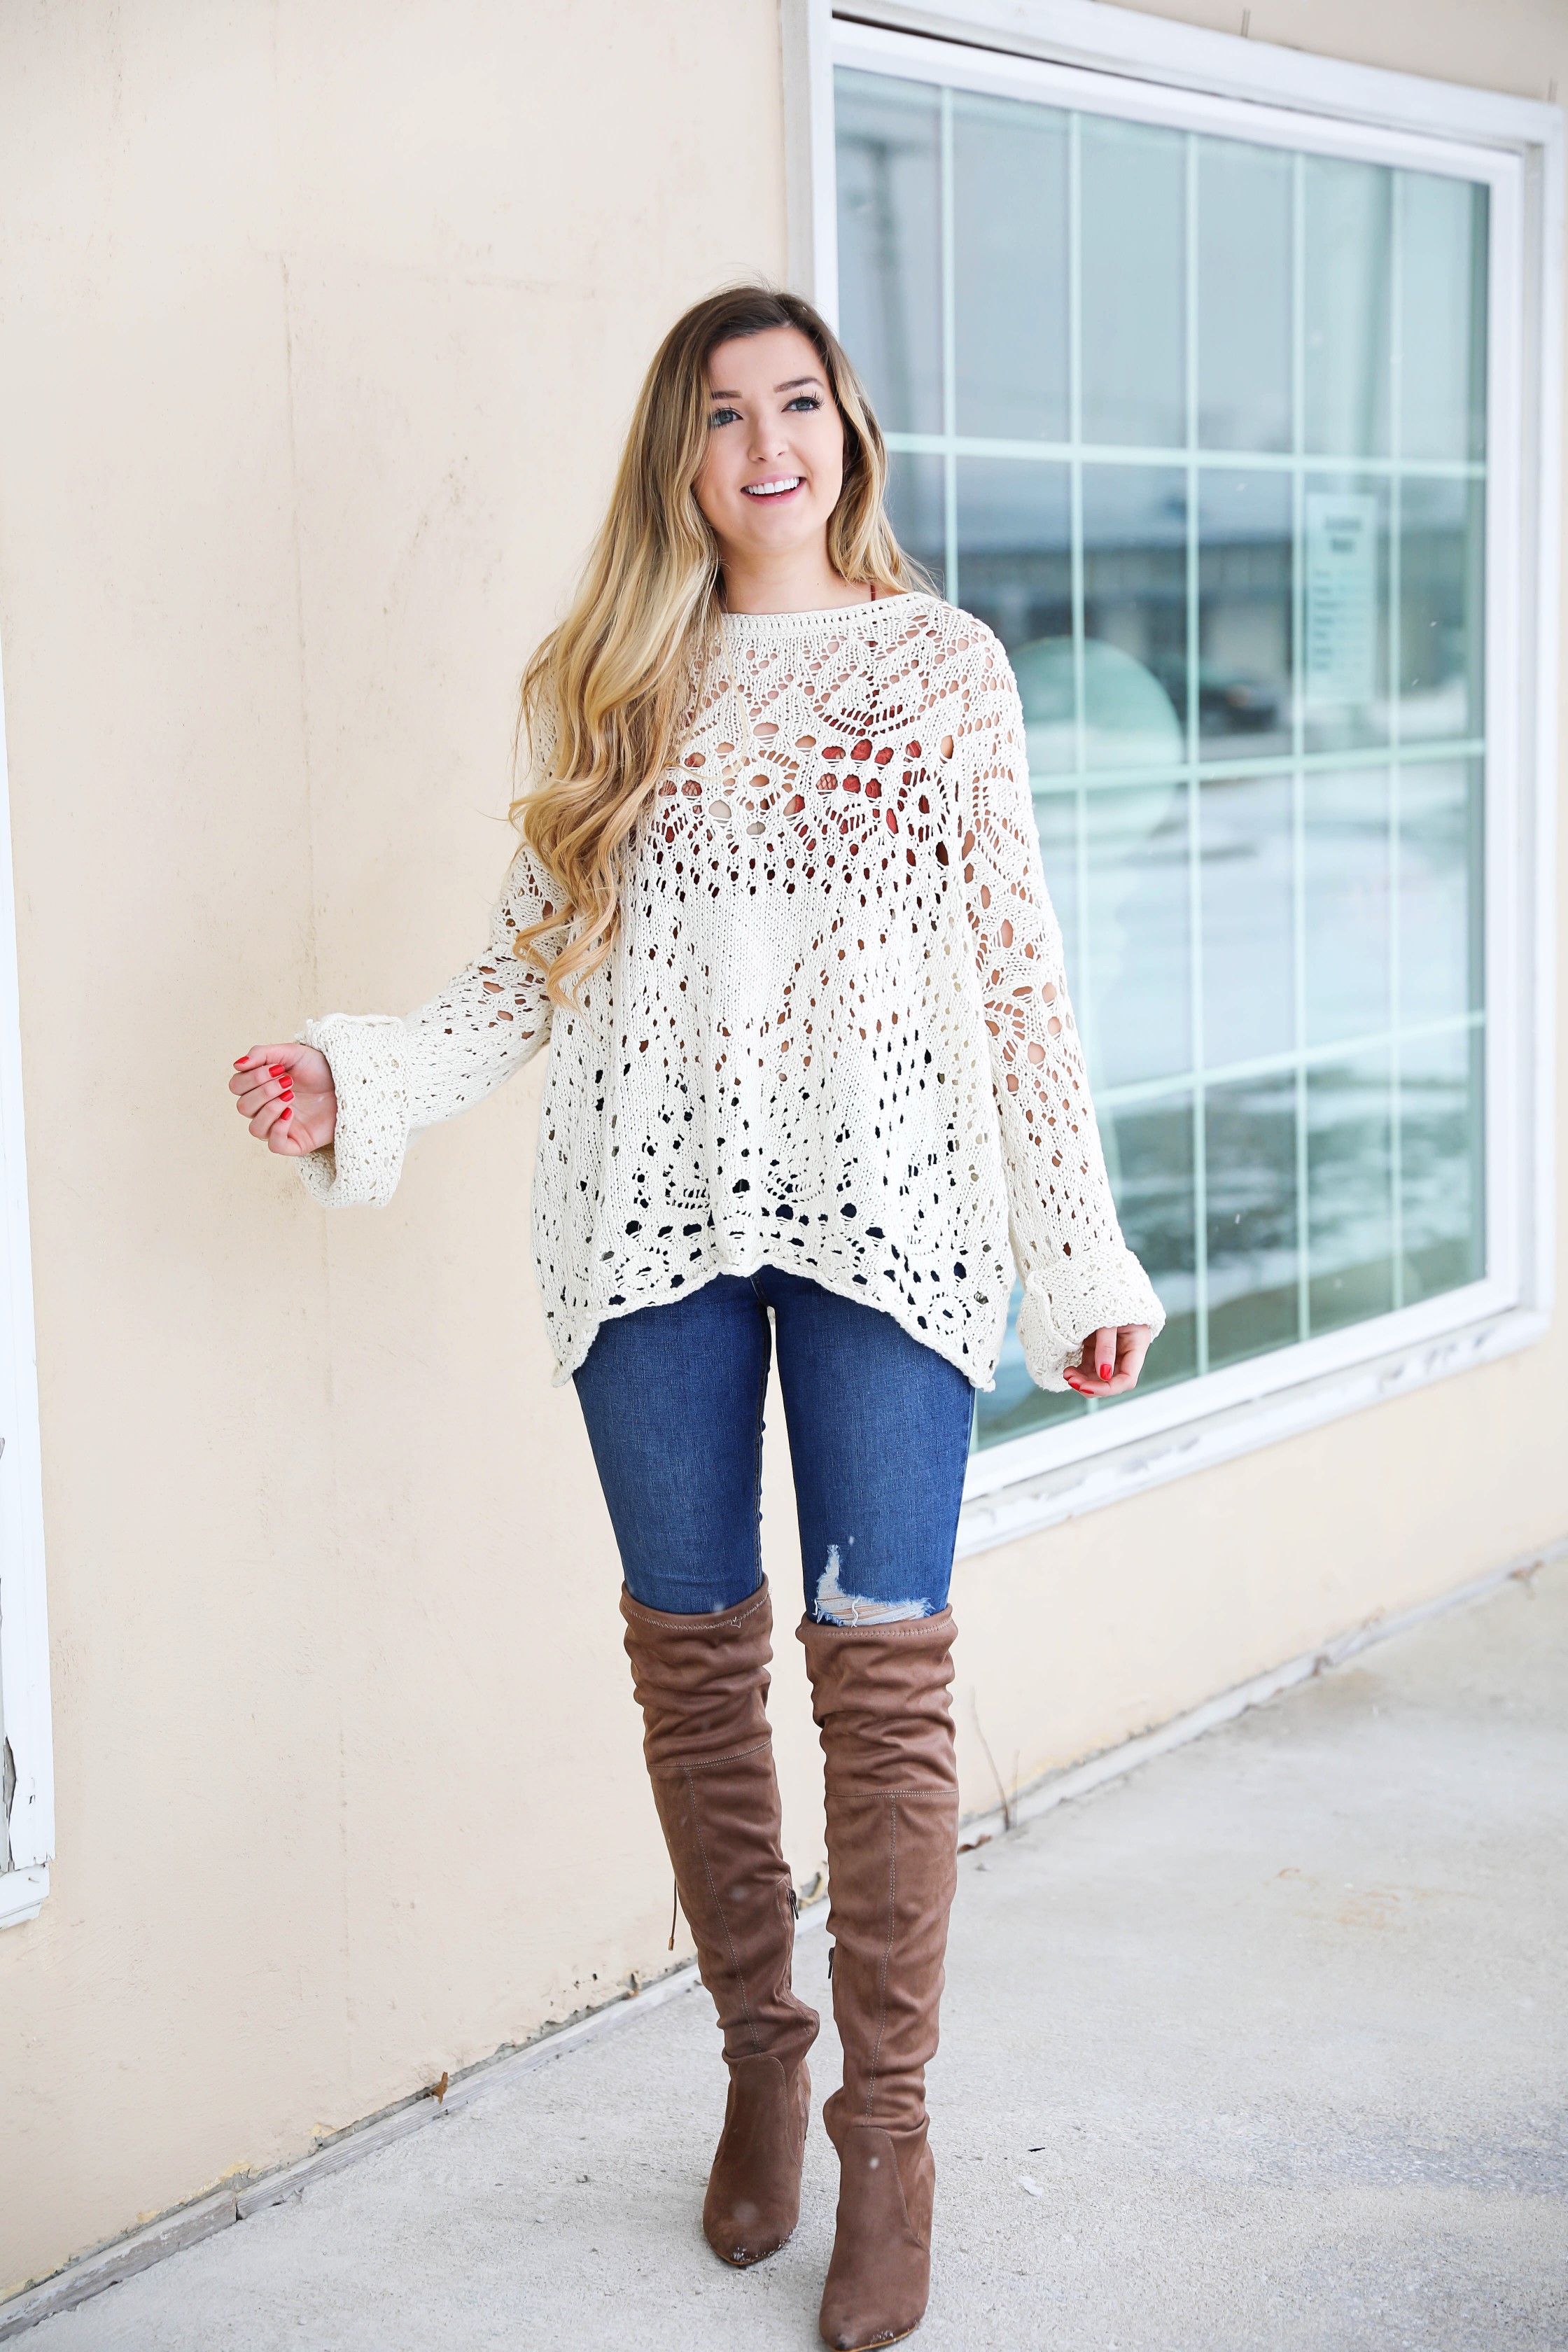 Free People crochet sweater and rust orange bralette peaking through the sweater! Love it with these over the knee boots and ripped denim jeans! Find the details on fashion blog daily dose of charm by lauren lindmark